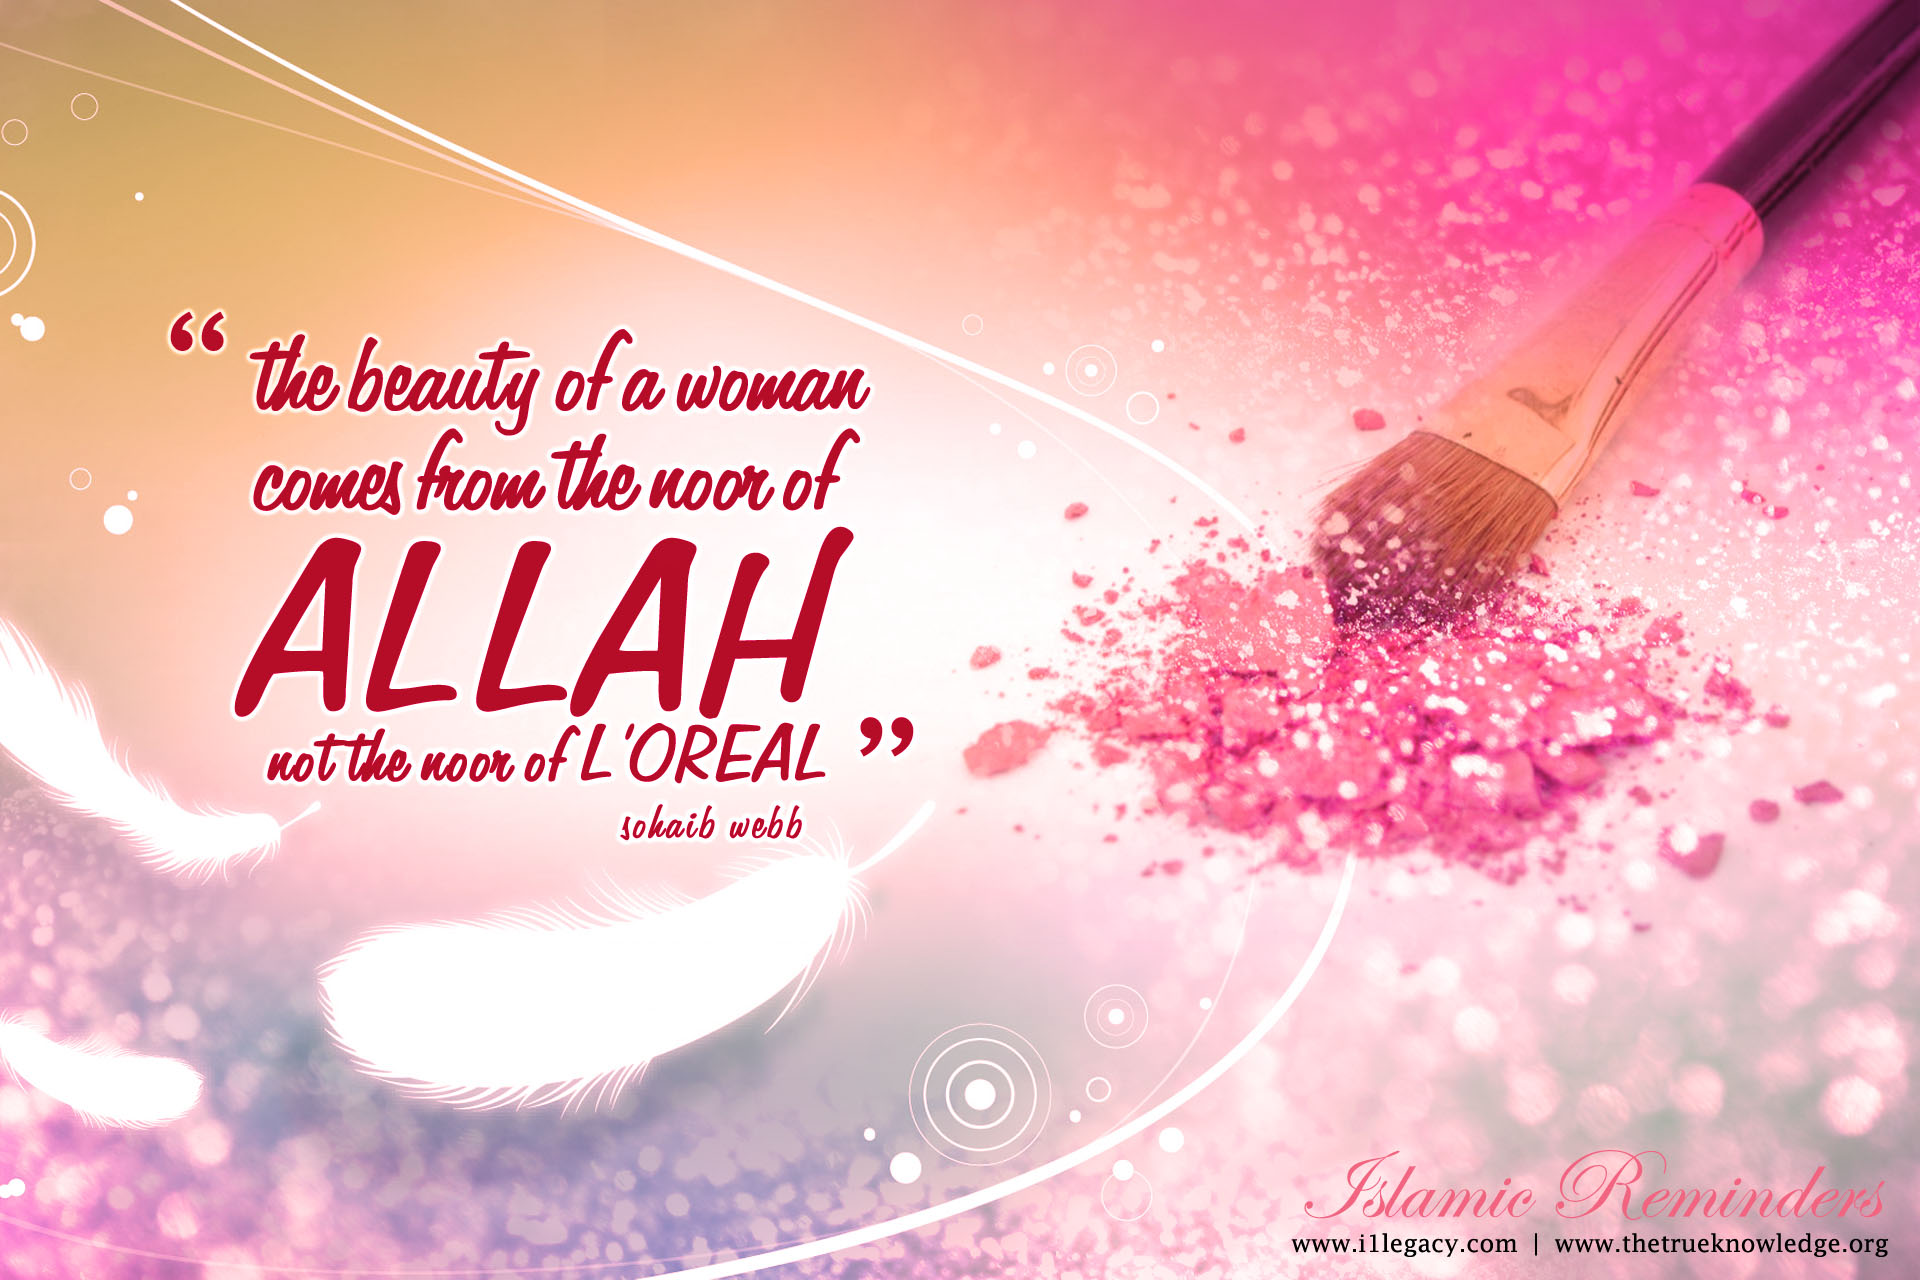 Islamic Wallpaper With Quotes - Beautiful Wallpapers With Islamic Quotes - HD Wallpaper 